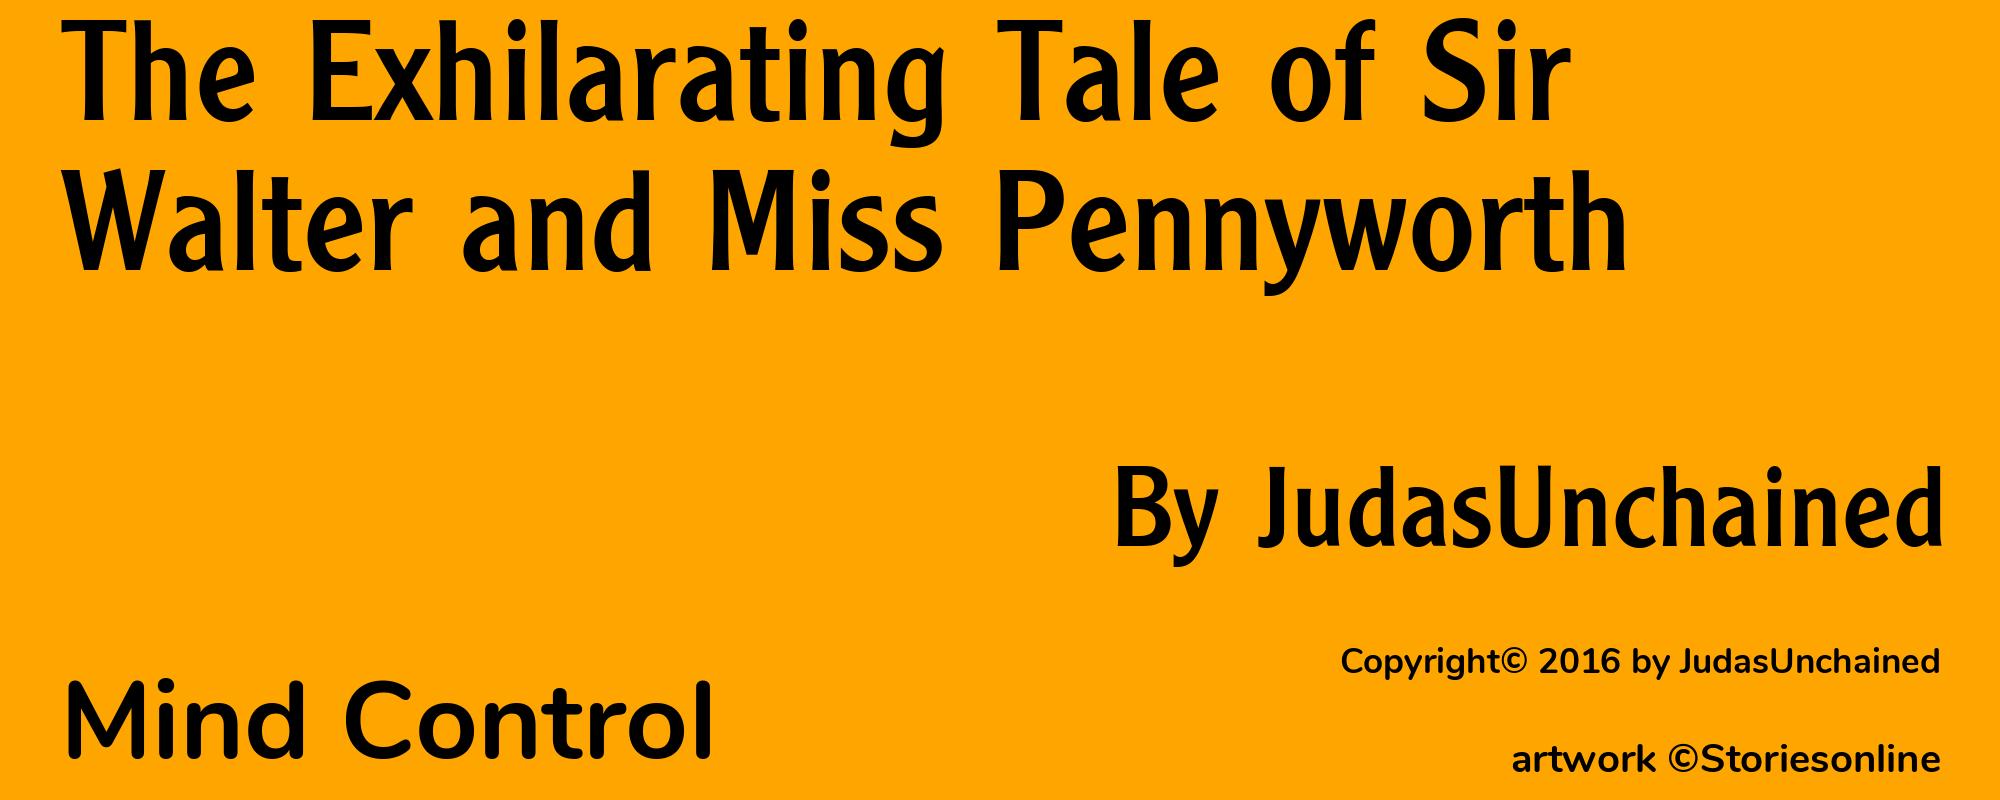 The Exhilarating Tale of Sir Walter and Miss Pennyworth - Cover